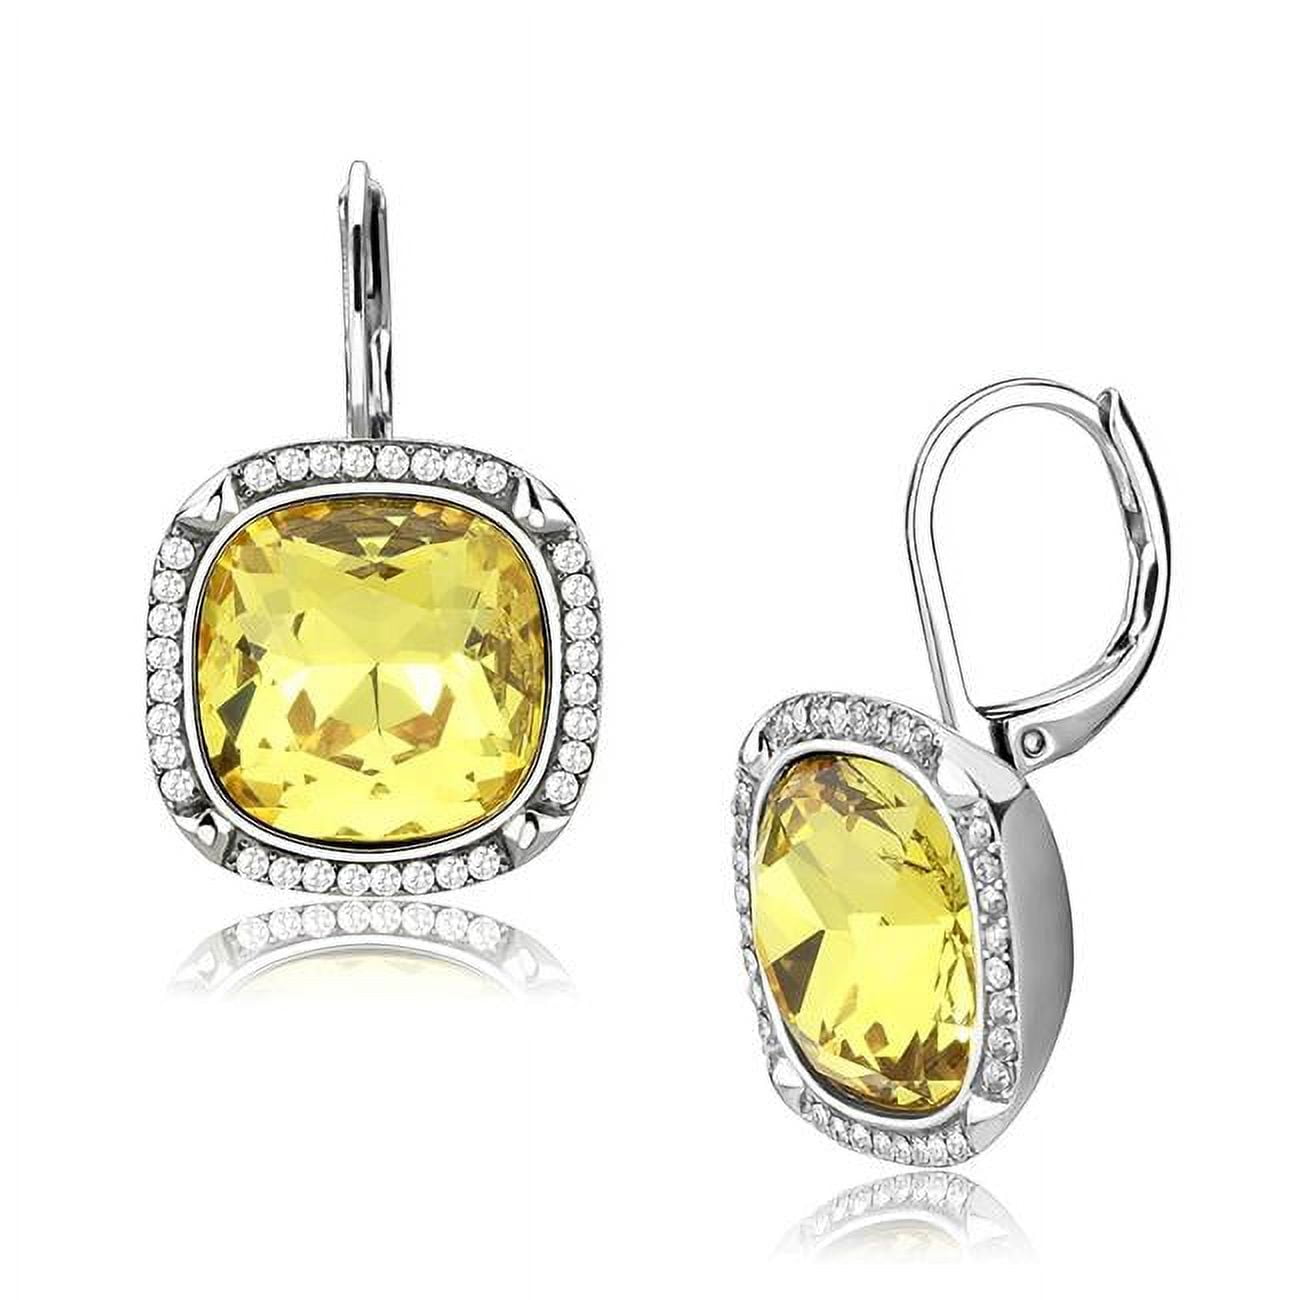 Picture of Alamode DA379 Women High Polished Stainless Steel Earrings with Top Grade Crystal in Topaz